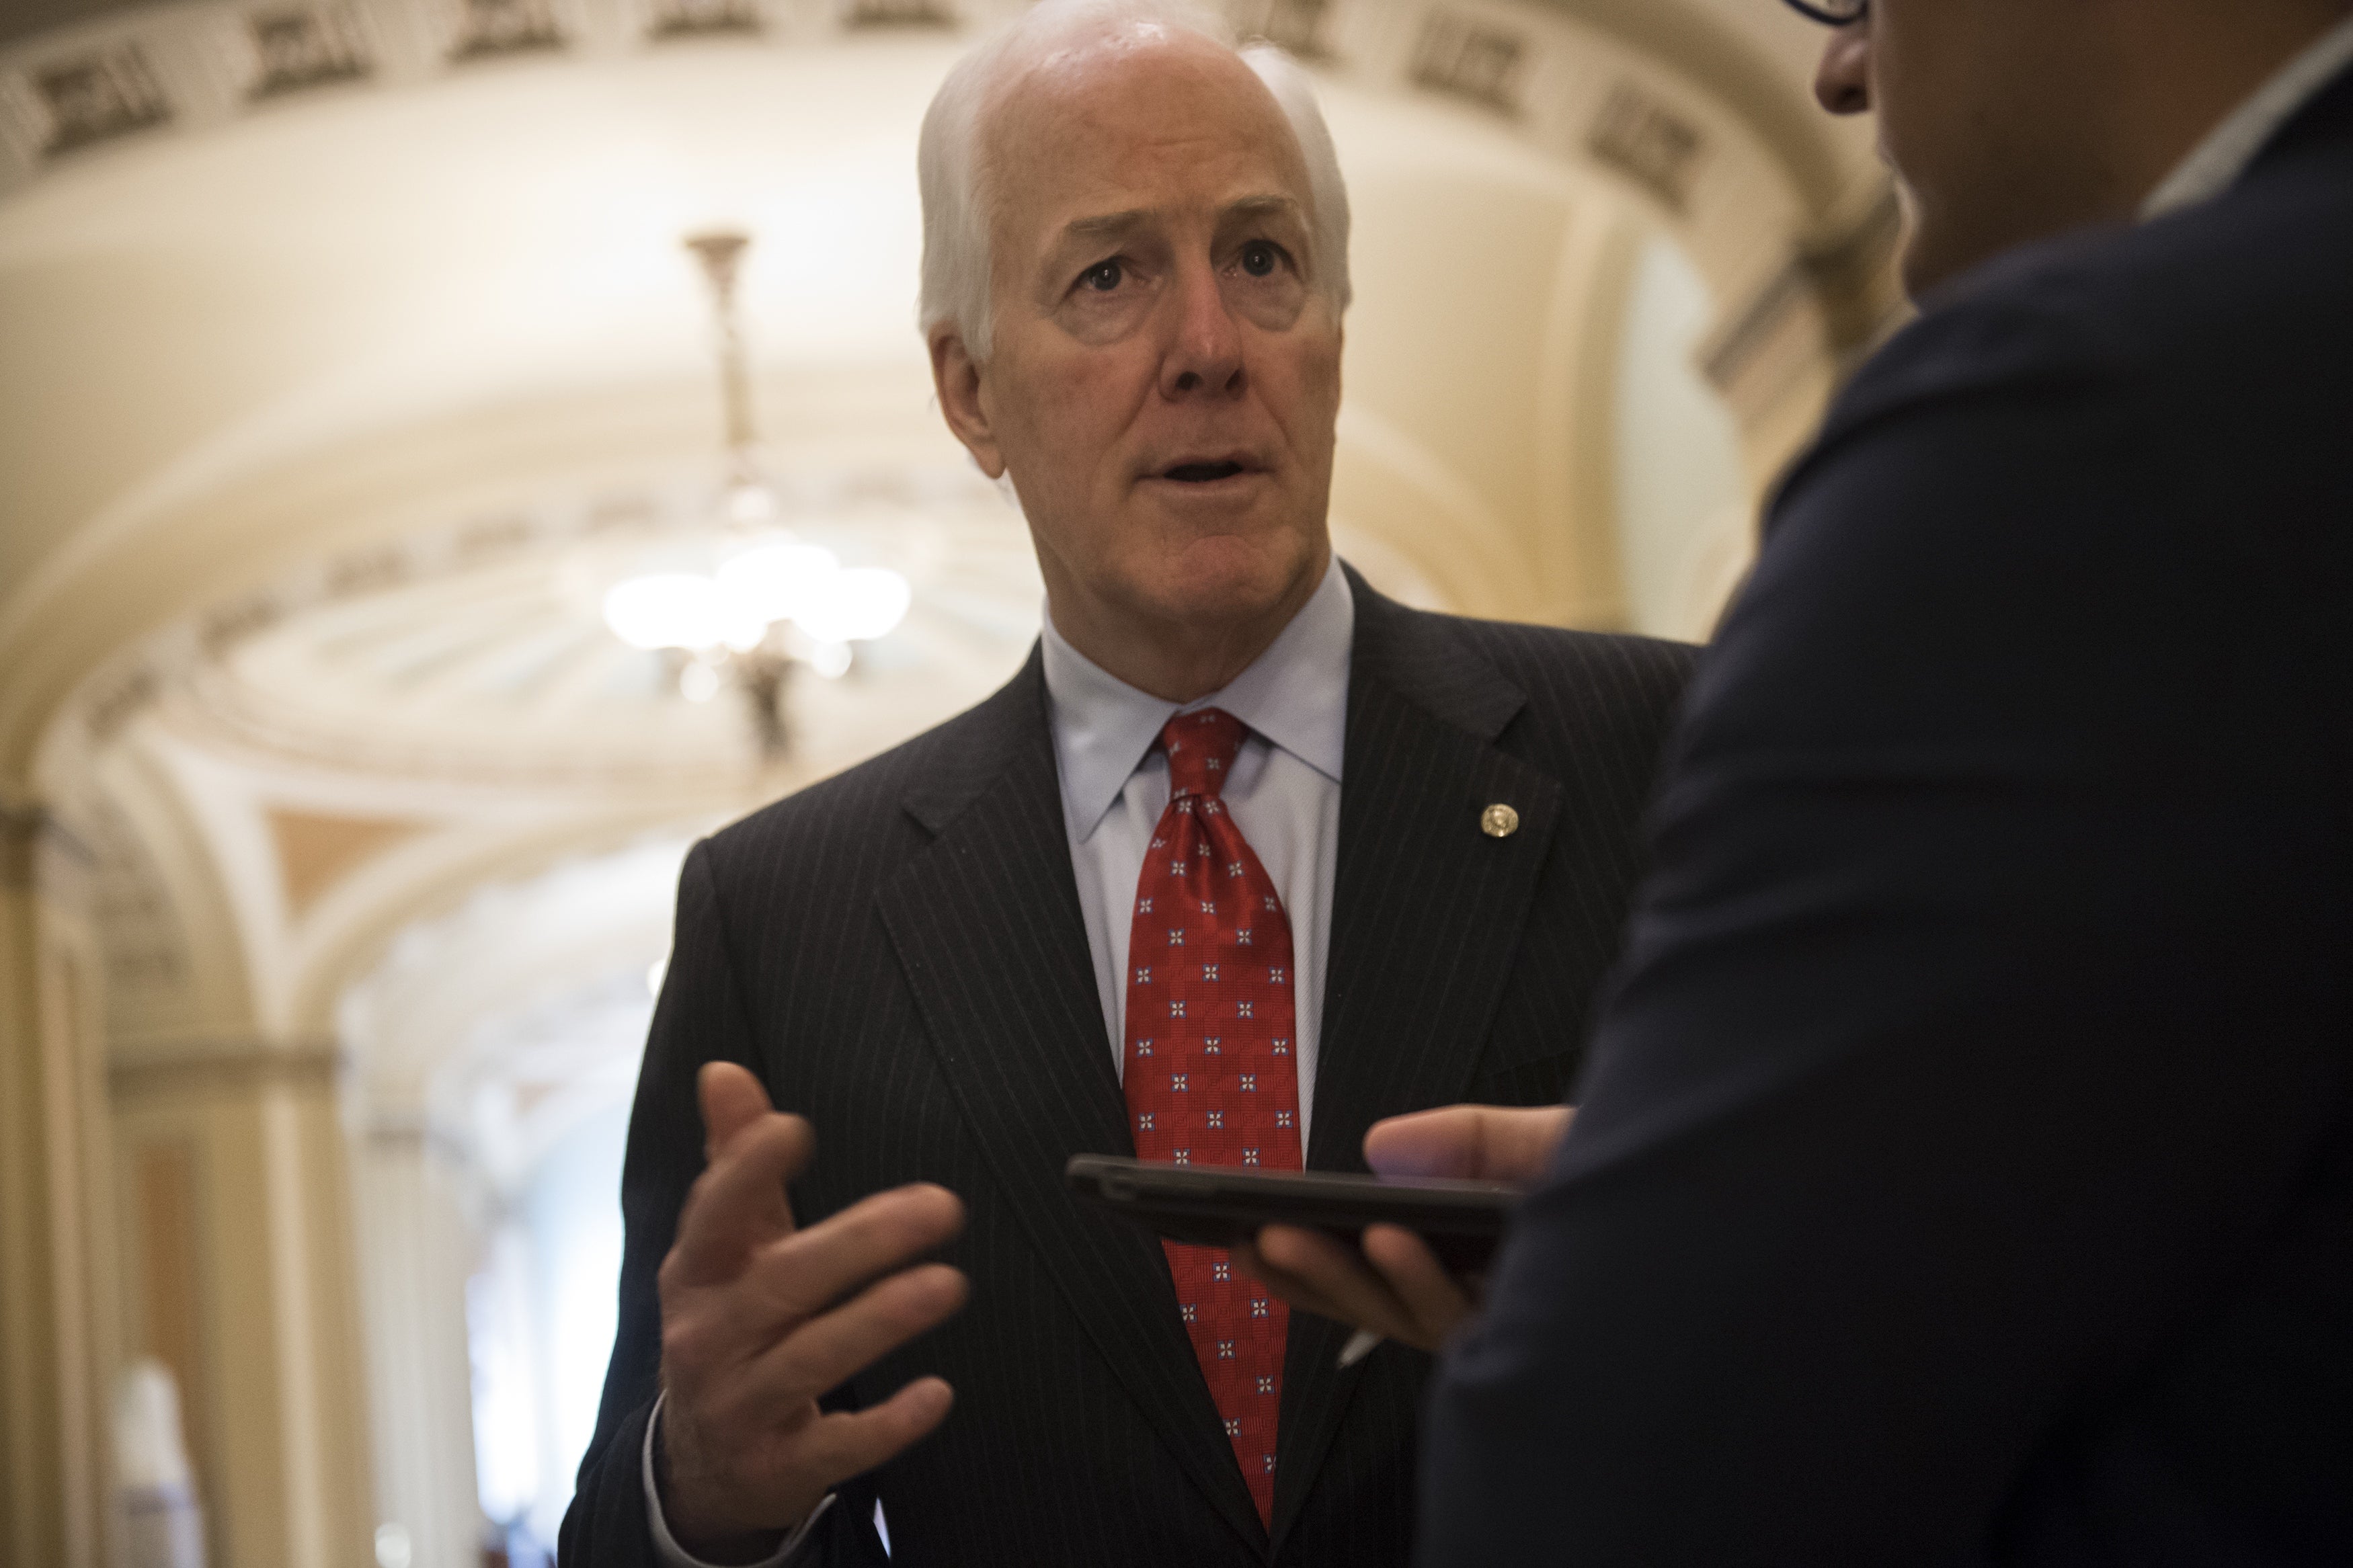 Texas Southern University Cancels Sen. Cornyn’s Commencement Speech After Student Opposition